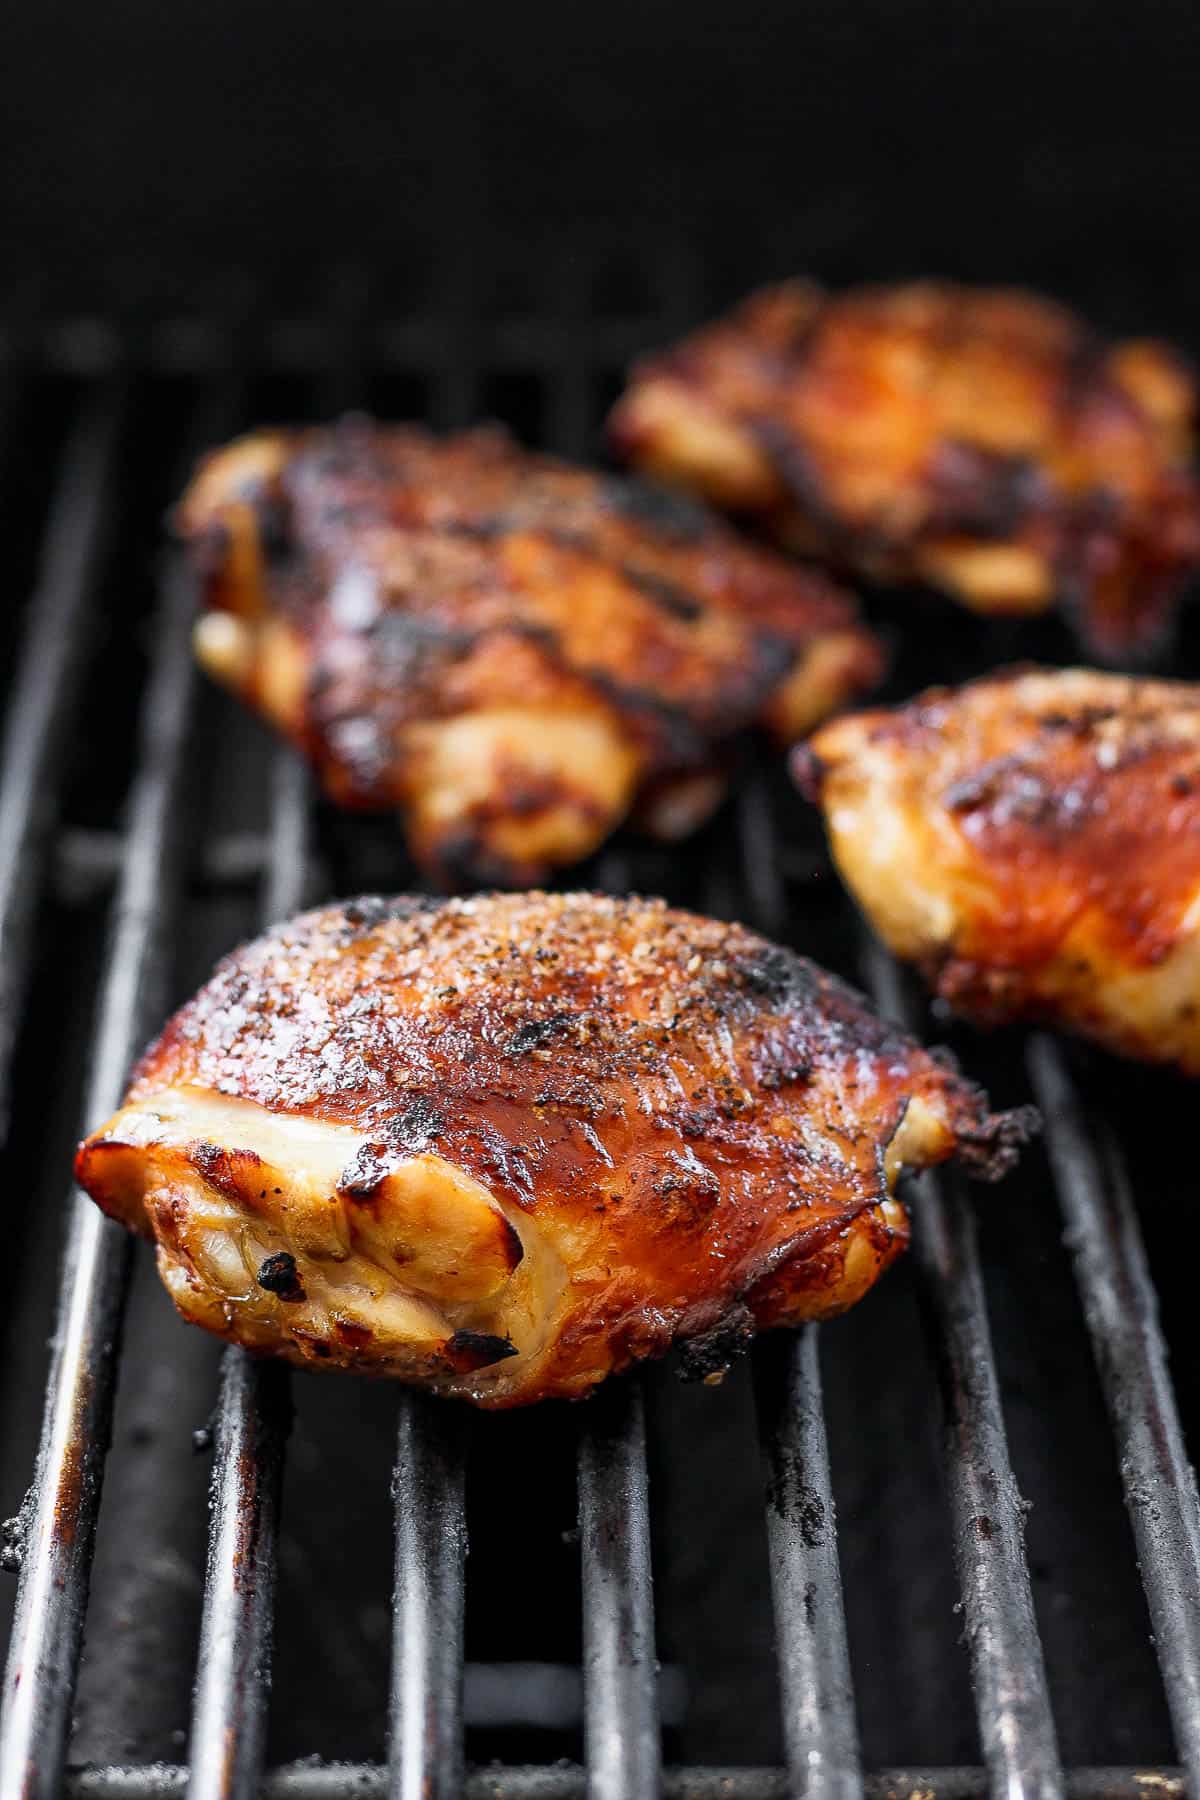 Pickle brined chicken on the grill.